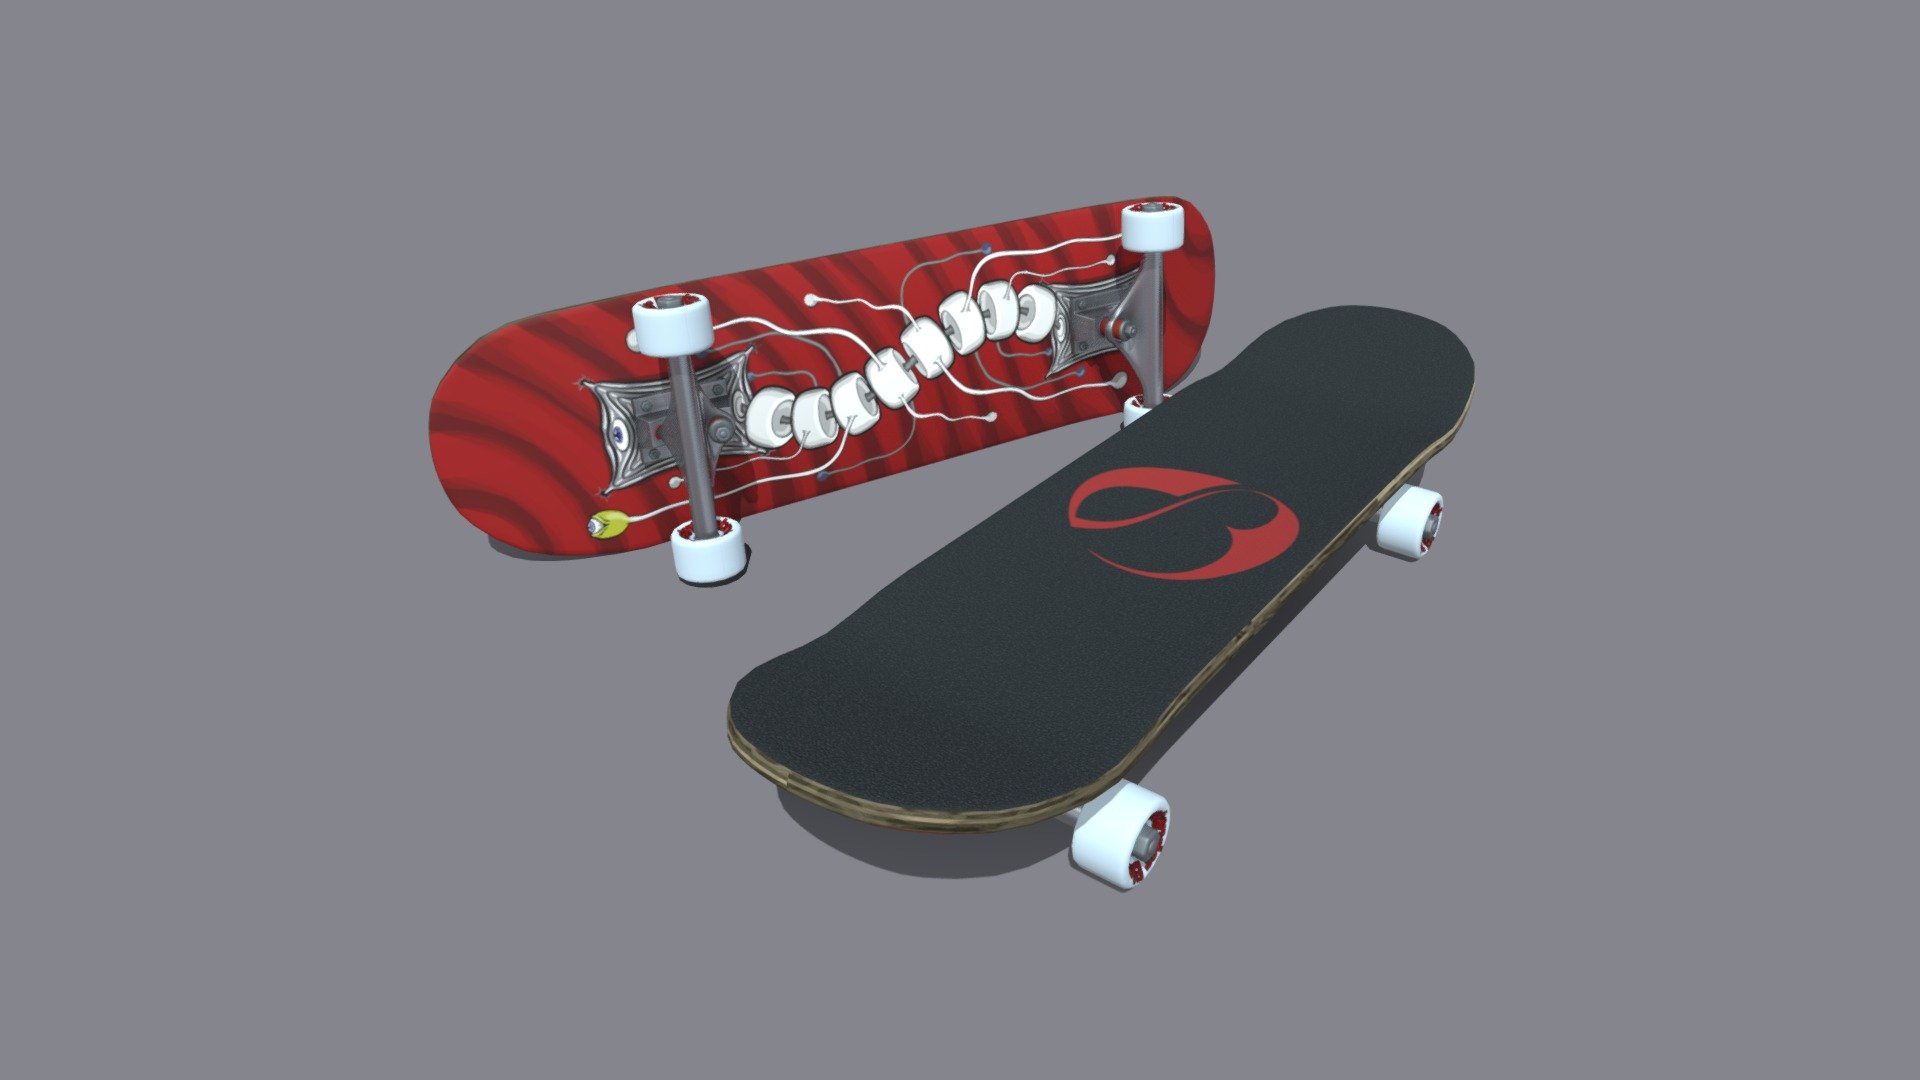 Skateboard modeled in Blender 3.1.

The modeling process for this skateboard is documented in these videos here: https://www.youtube.com/watch?v=eaZay4QNO6k - Skateboard - 3D model by BlenderPretender 3d model